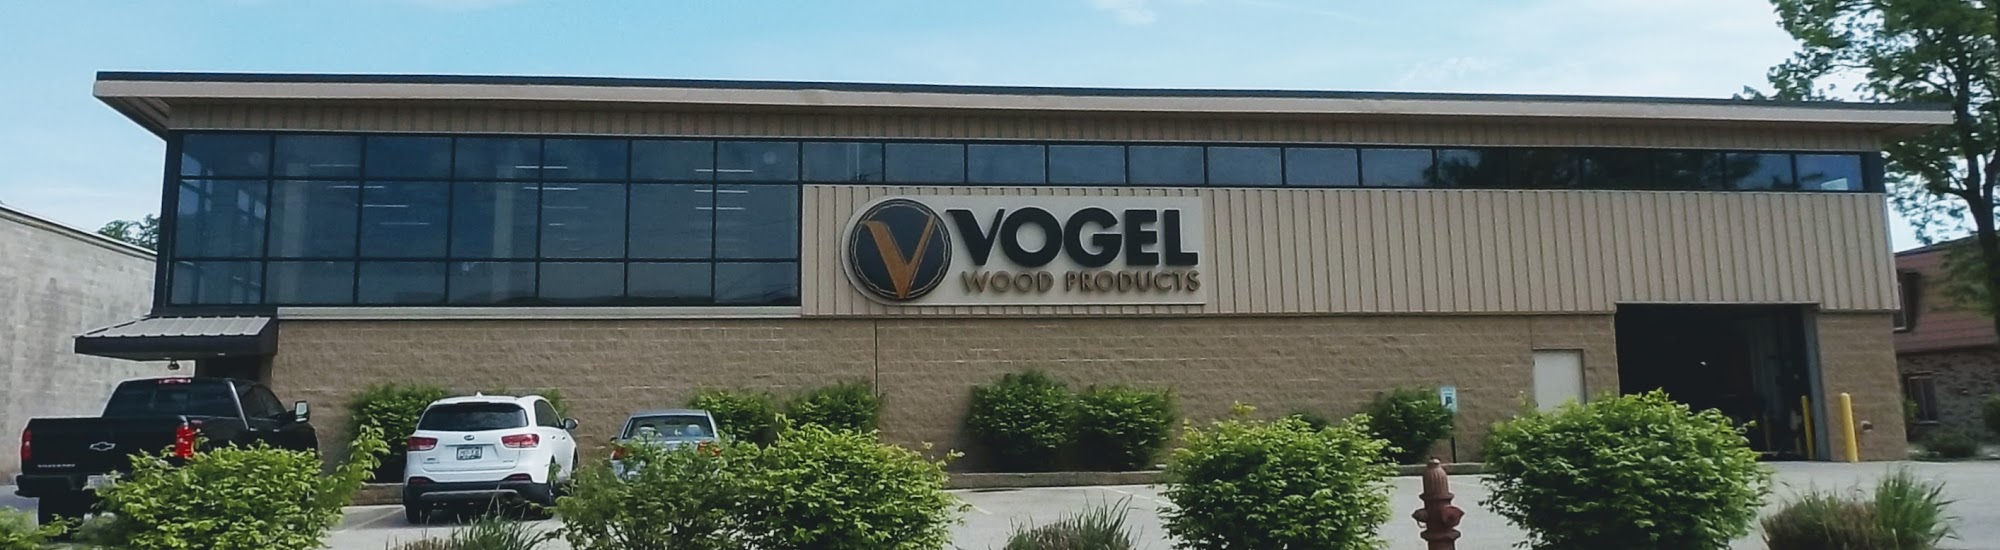 Vogel Wood Products